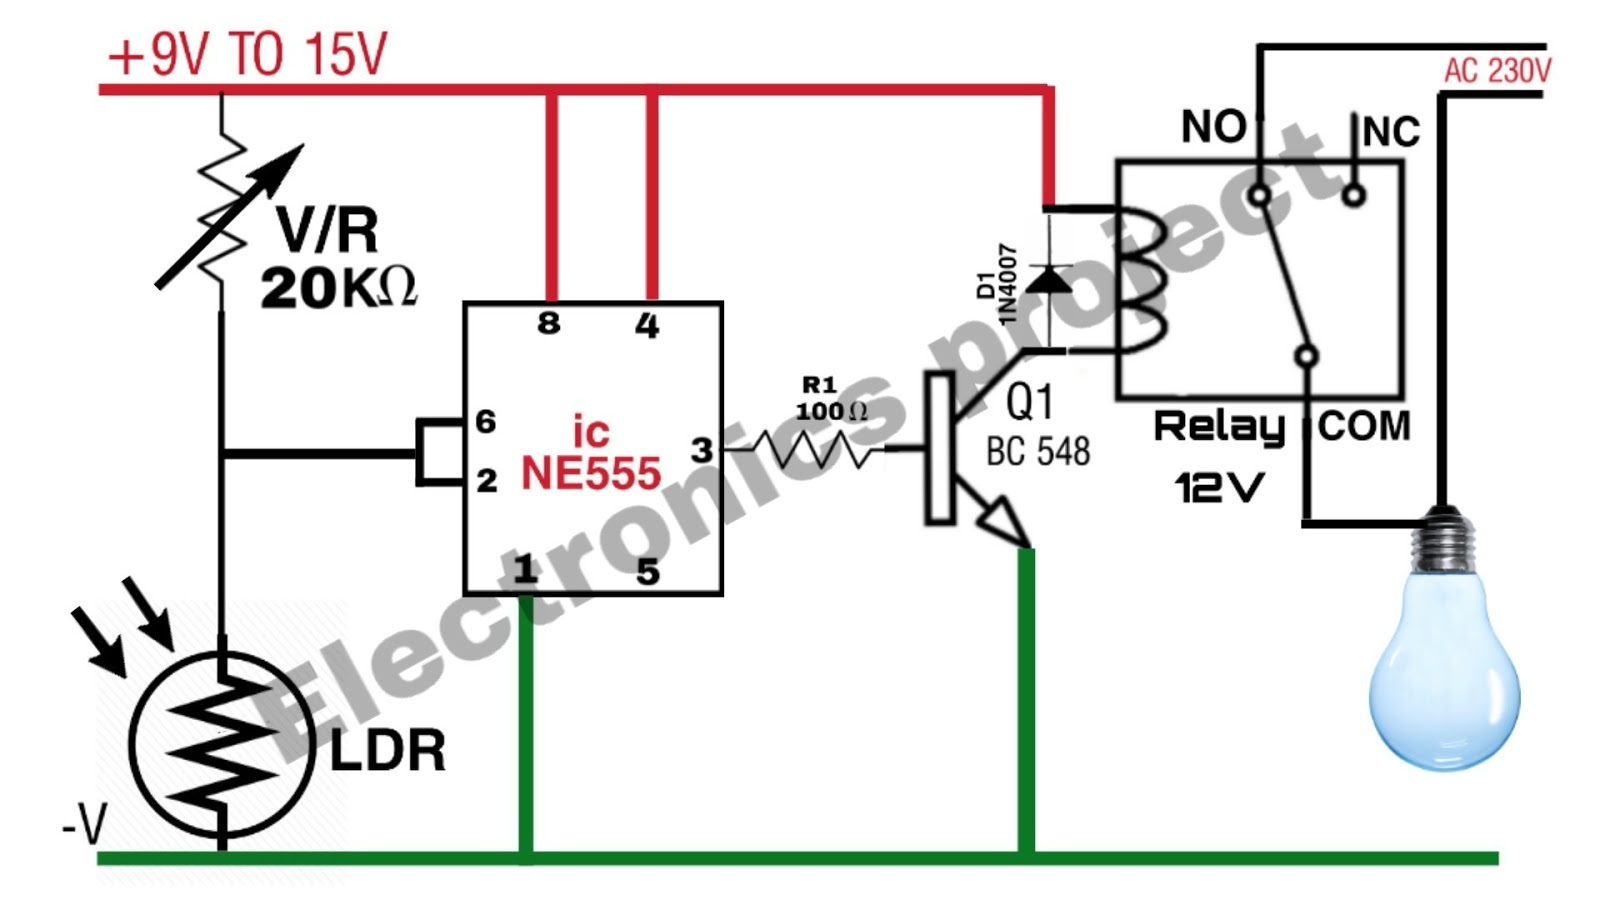 day-night on/off switch circuit diagram